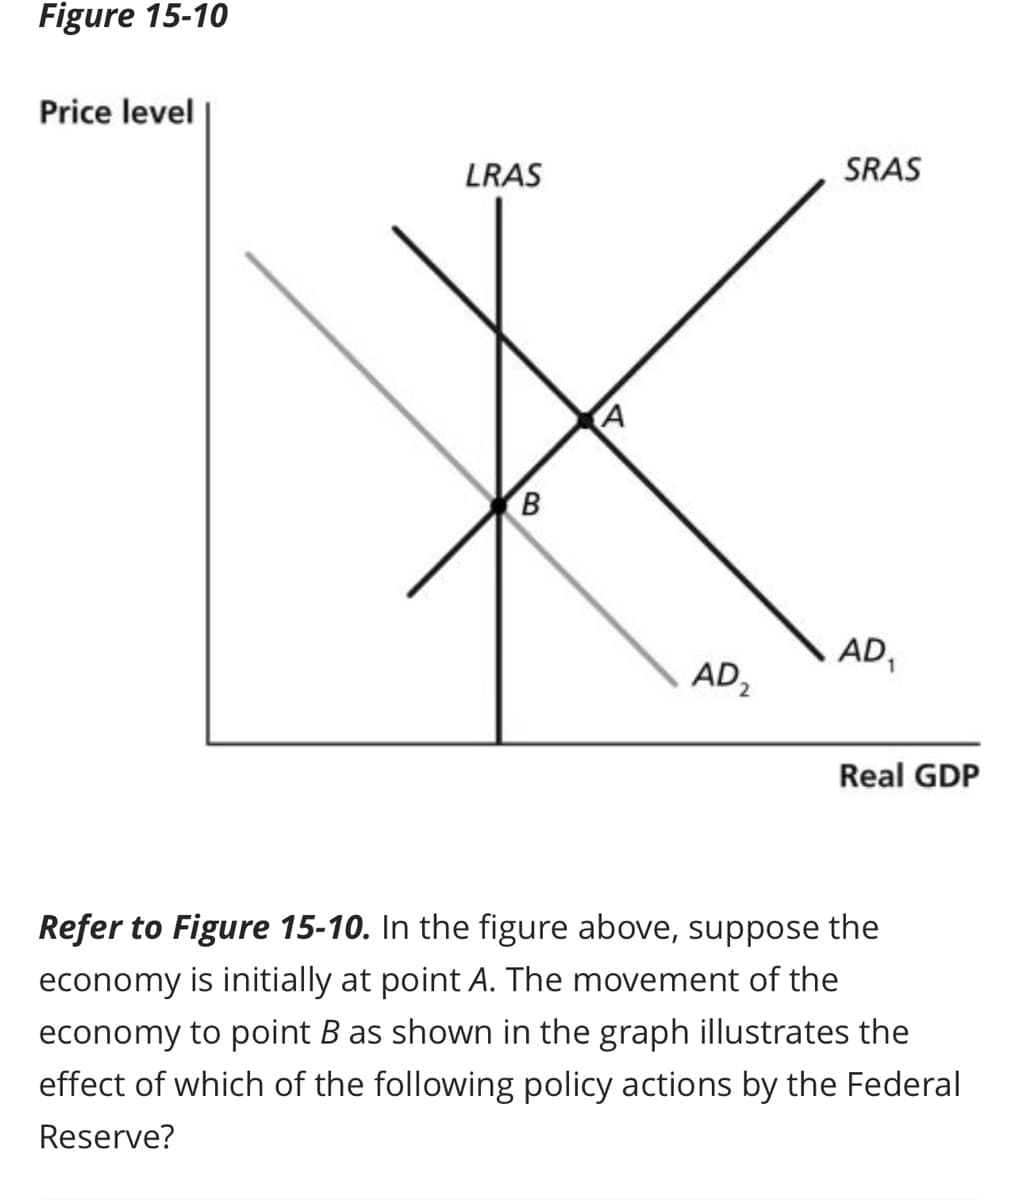 Figure 15-10
Price level
LRAS
B
A
AD₂
SRAS
AD₁
Real GDP
Refer to Figure 15-10. In the figure above, suppose the
economy is initially at point A. The movement of the
economy to point B as shown in the graph illustrates the
effect of which of the following policy actions by the Federal
Reserve?